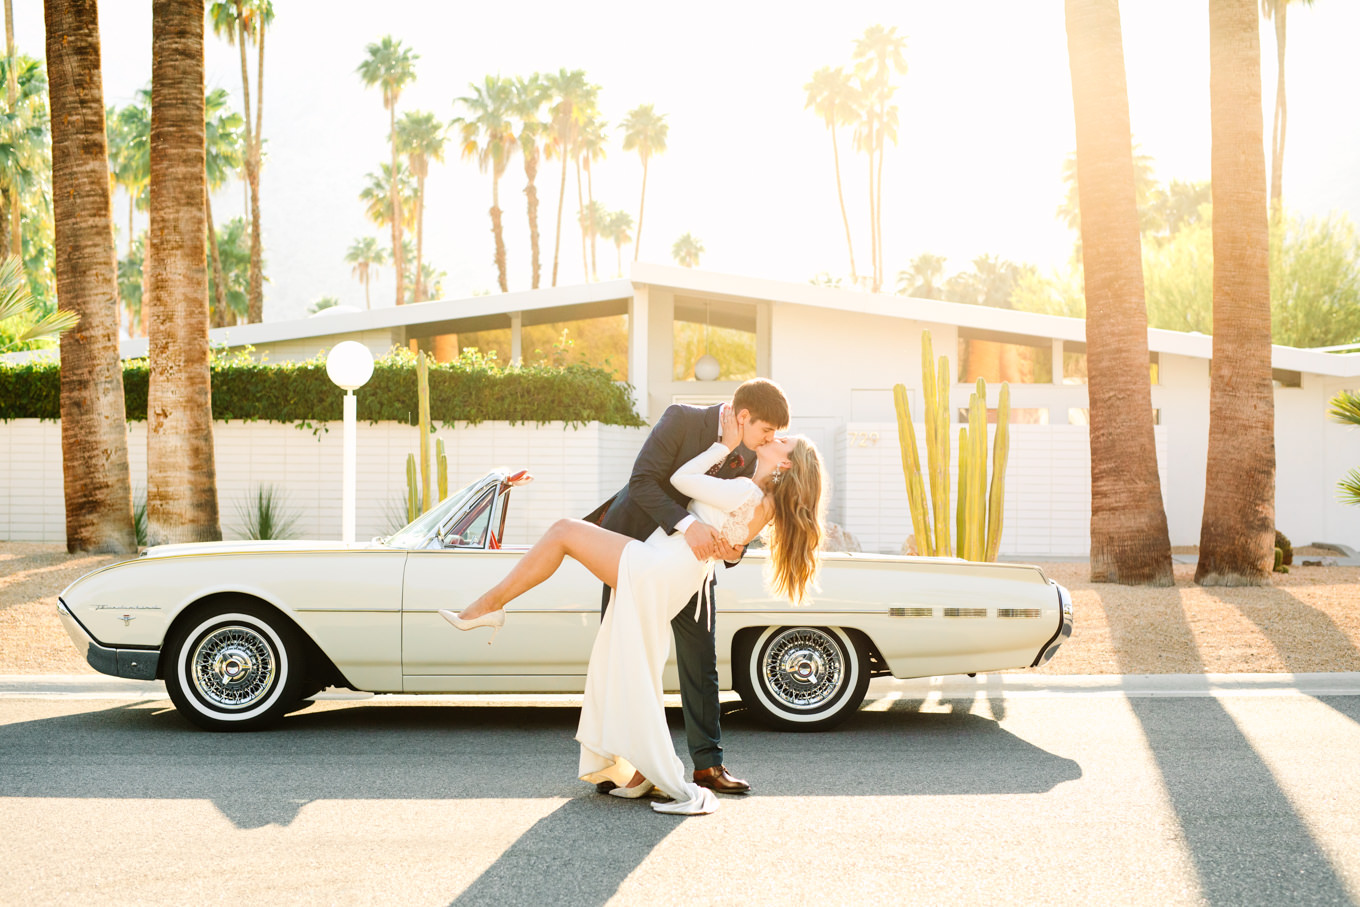 Bride and groom kissing with Ford Thunderbird | Colorful jewel tone Palm Springs elopement | Fresh and colorful photography for fun-loving couples in Southern California | #colorfulelopement #palmspringselopement #elopementphotography #palmspringswedding Source: Mary Costa Photography | Los Angeles